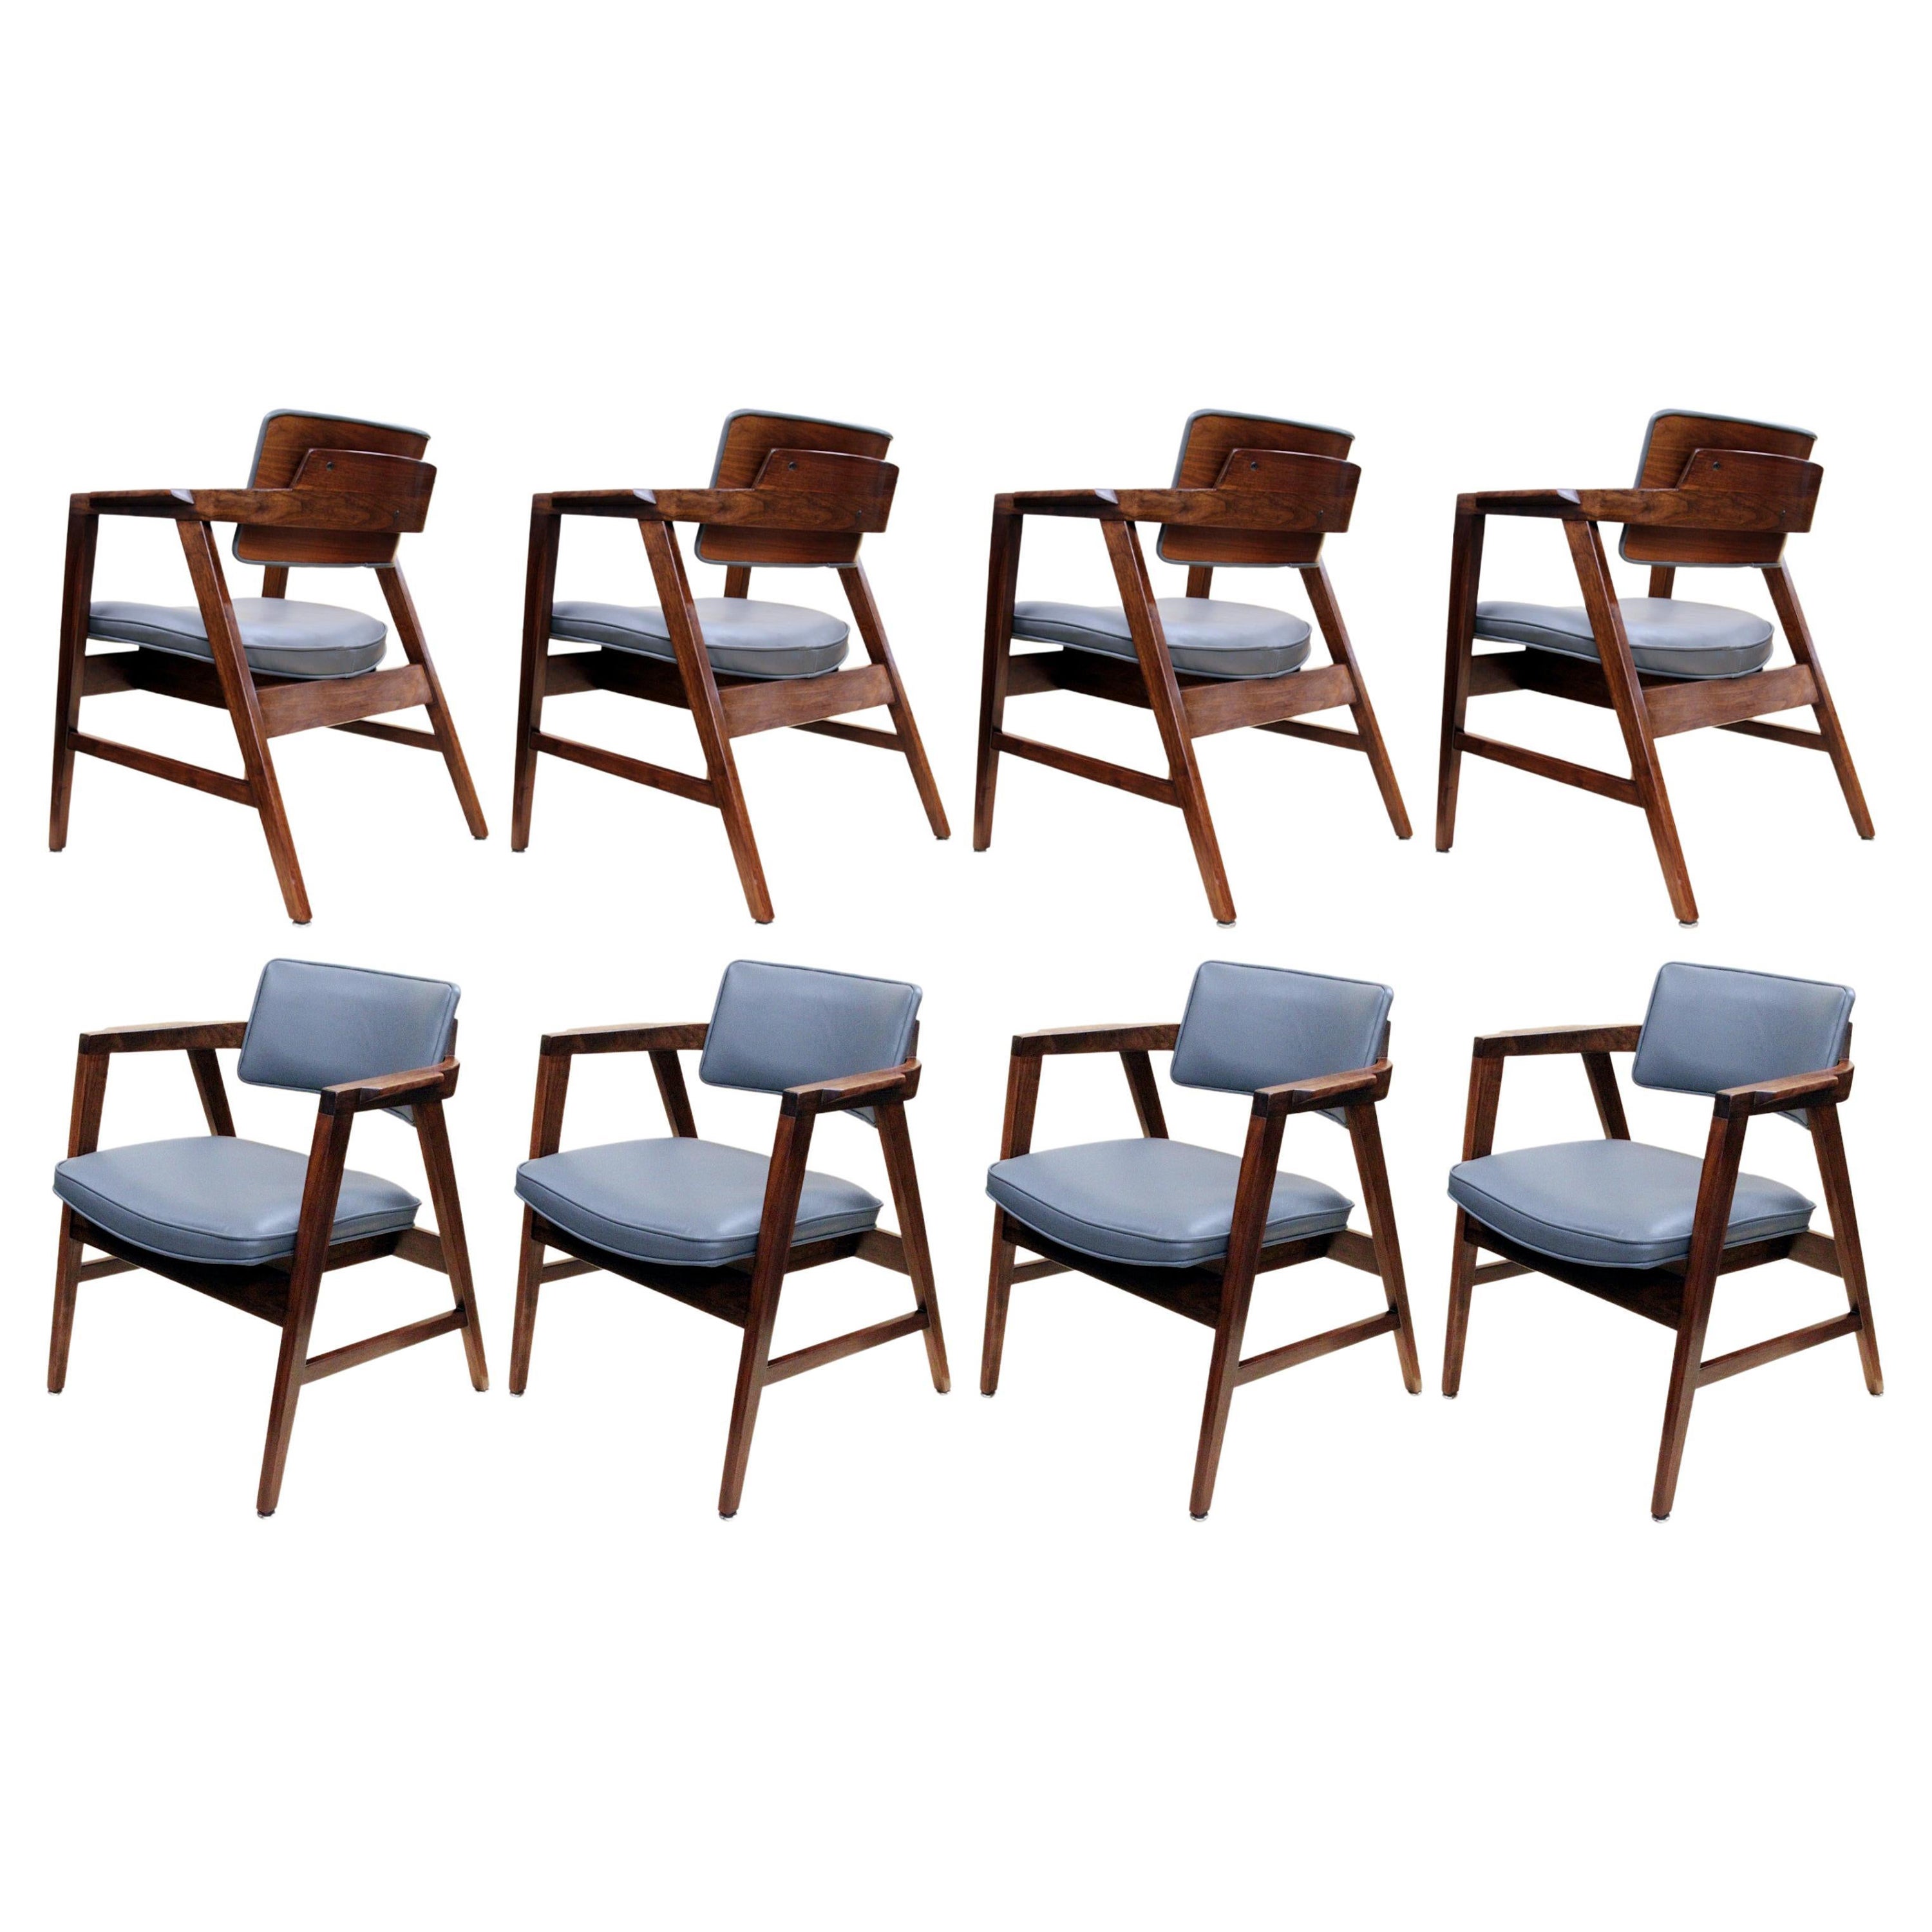 Set of 8 Mid-Century Modern Walnut & Gray Leather Dining Chairs by Gunlocke For Sale